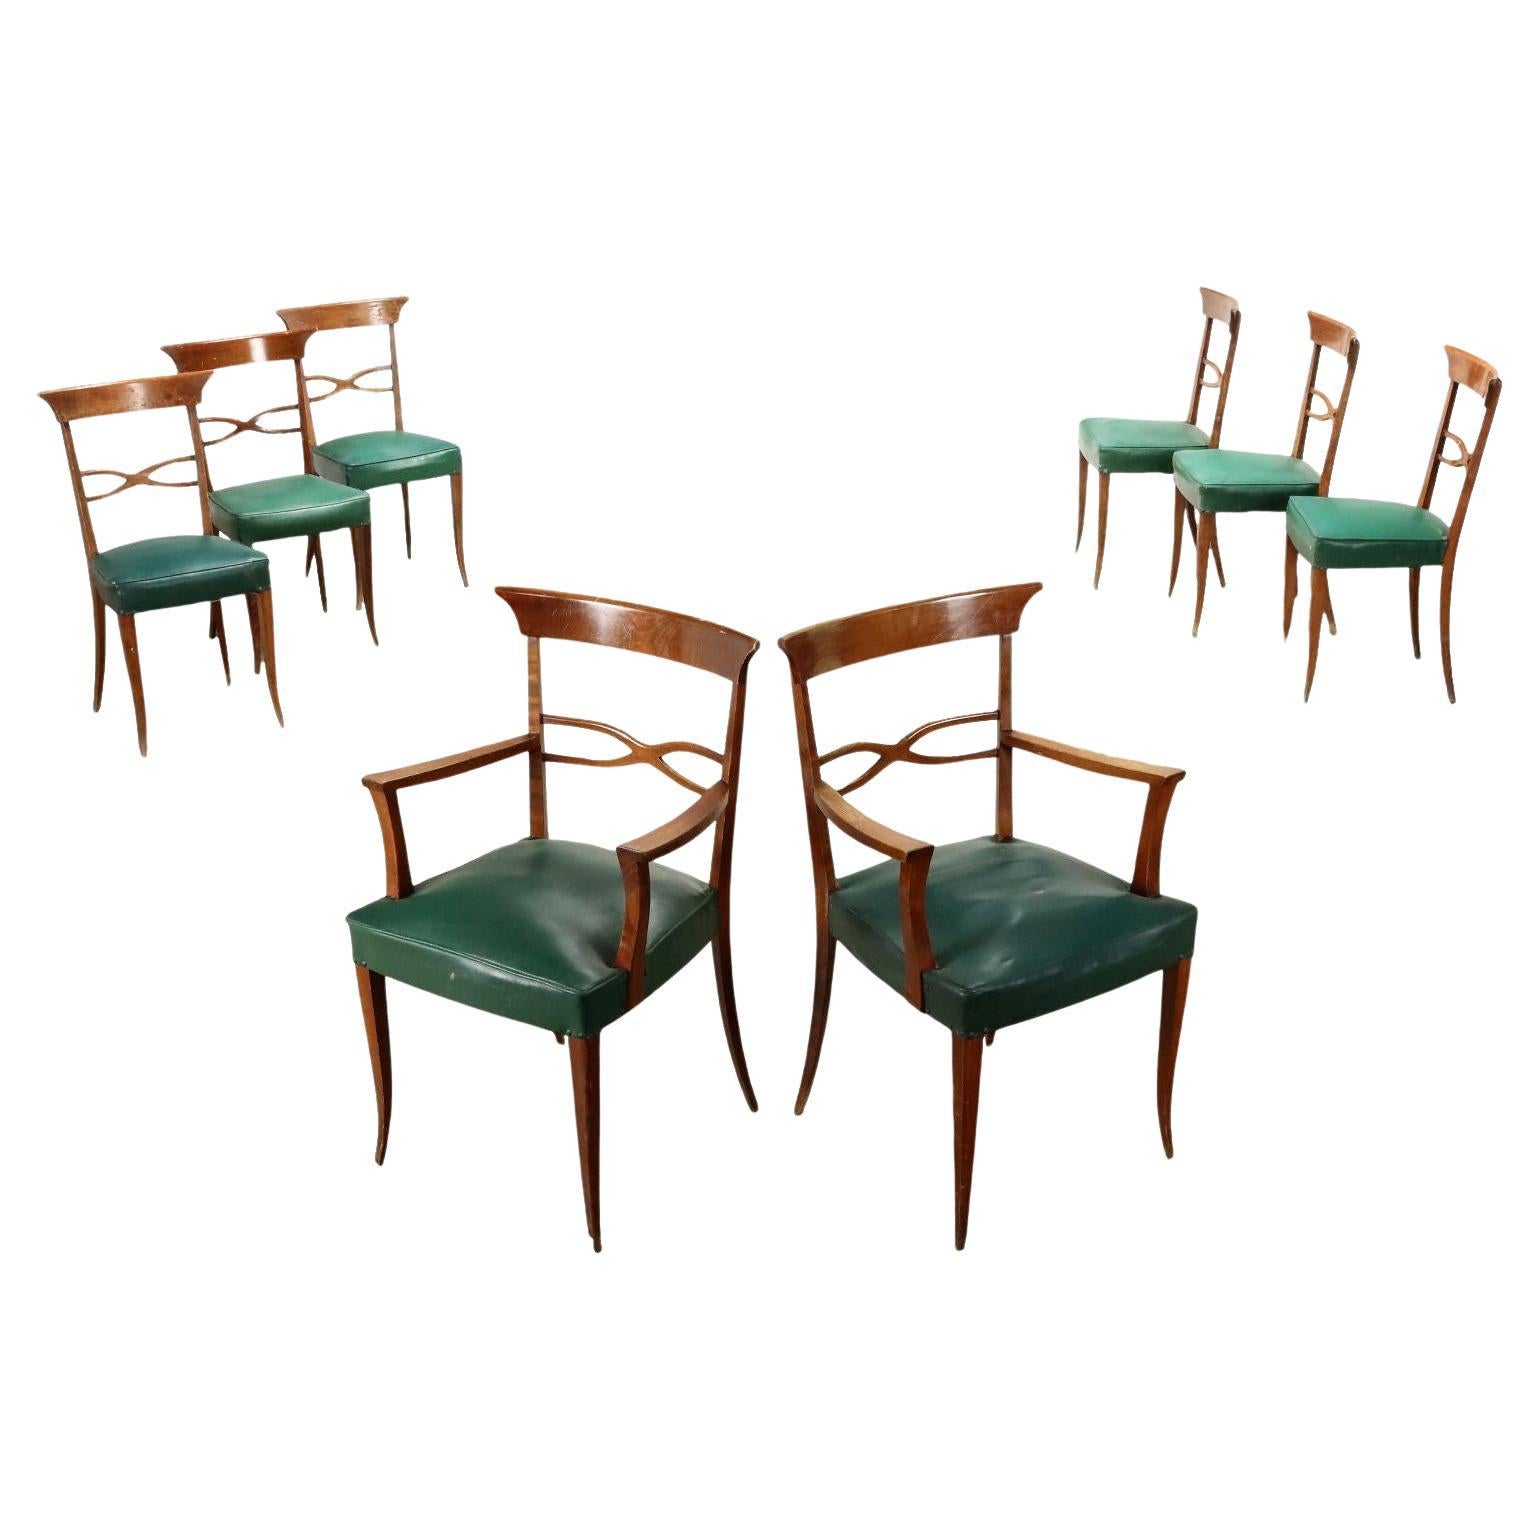 Group of six Chairs and two armchairs 1950s beech and green leatherette